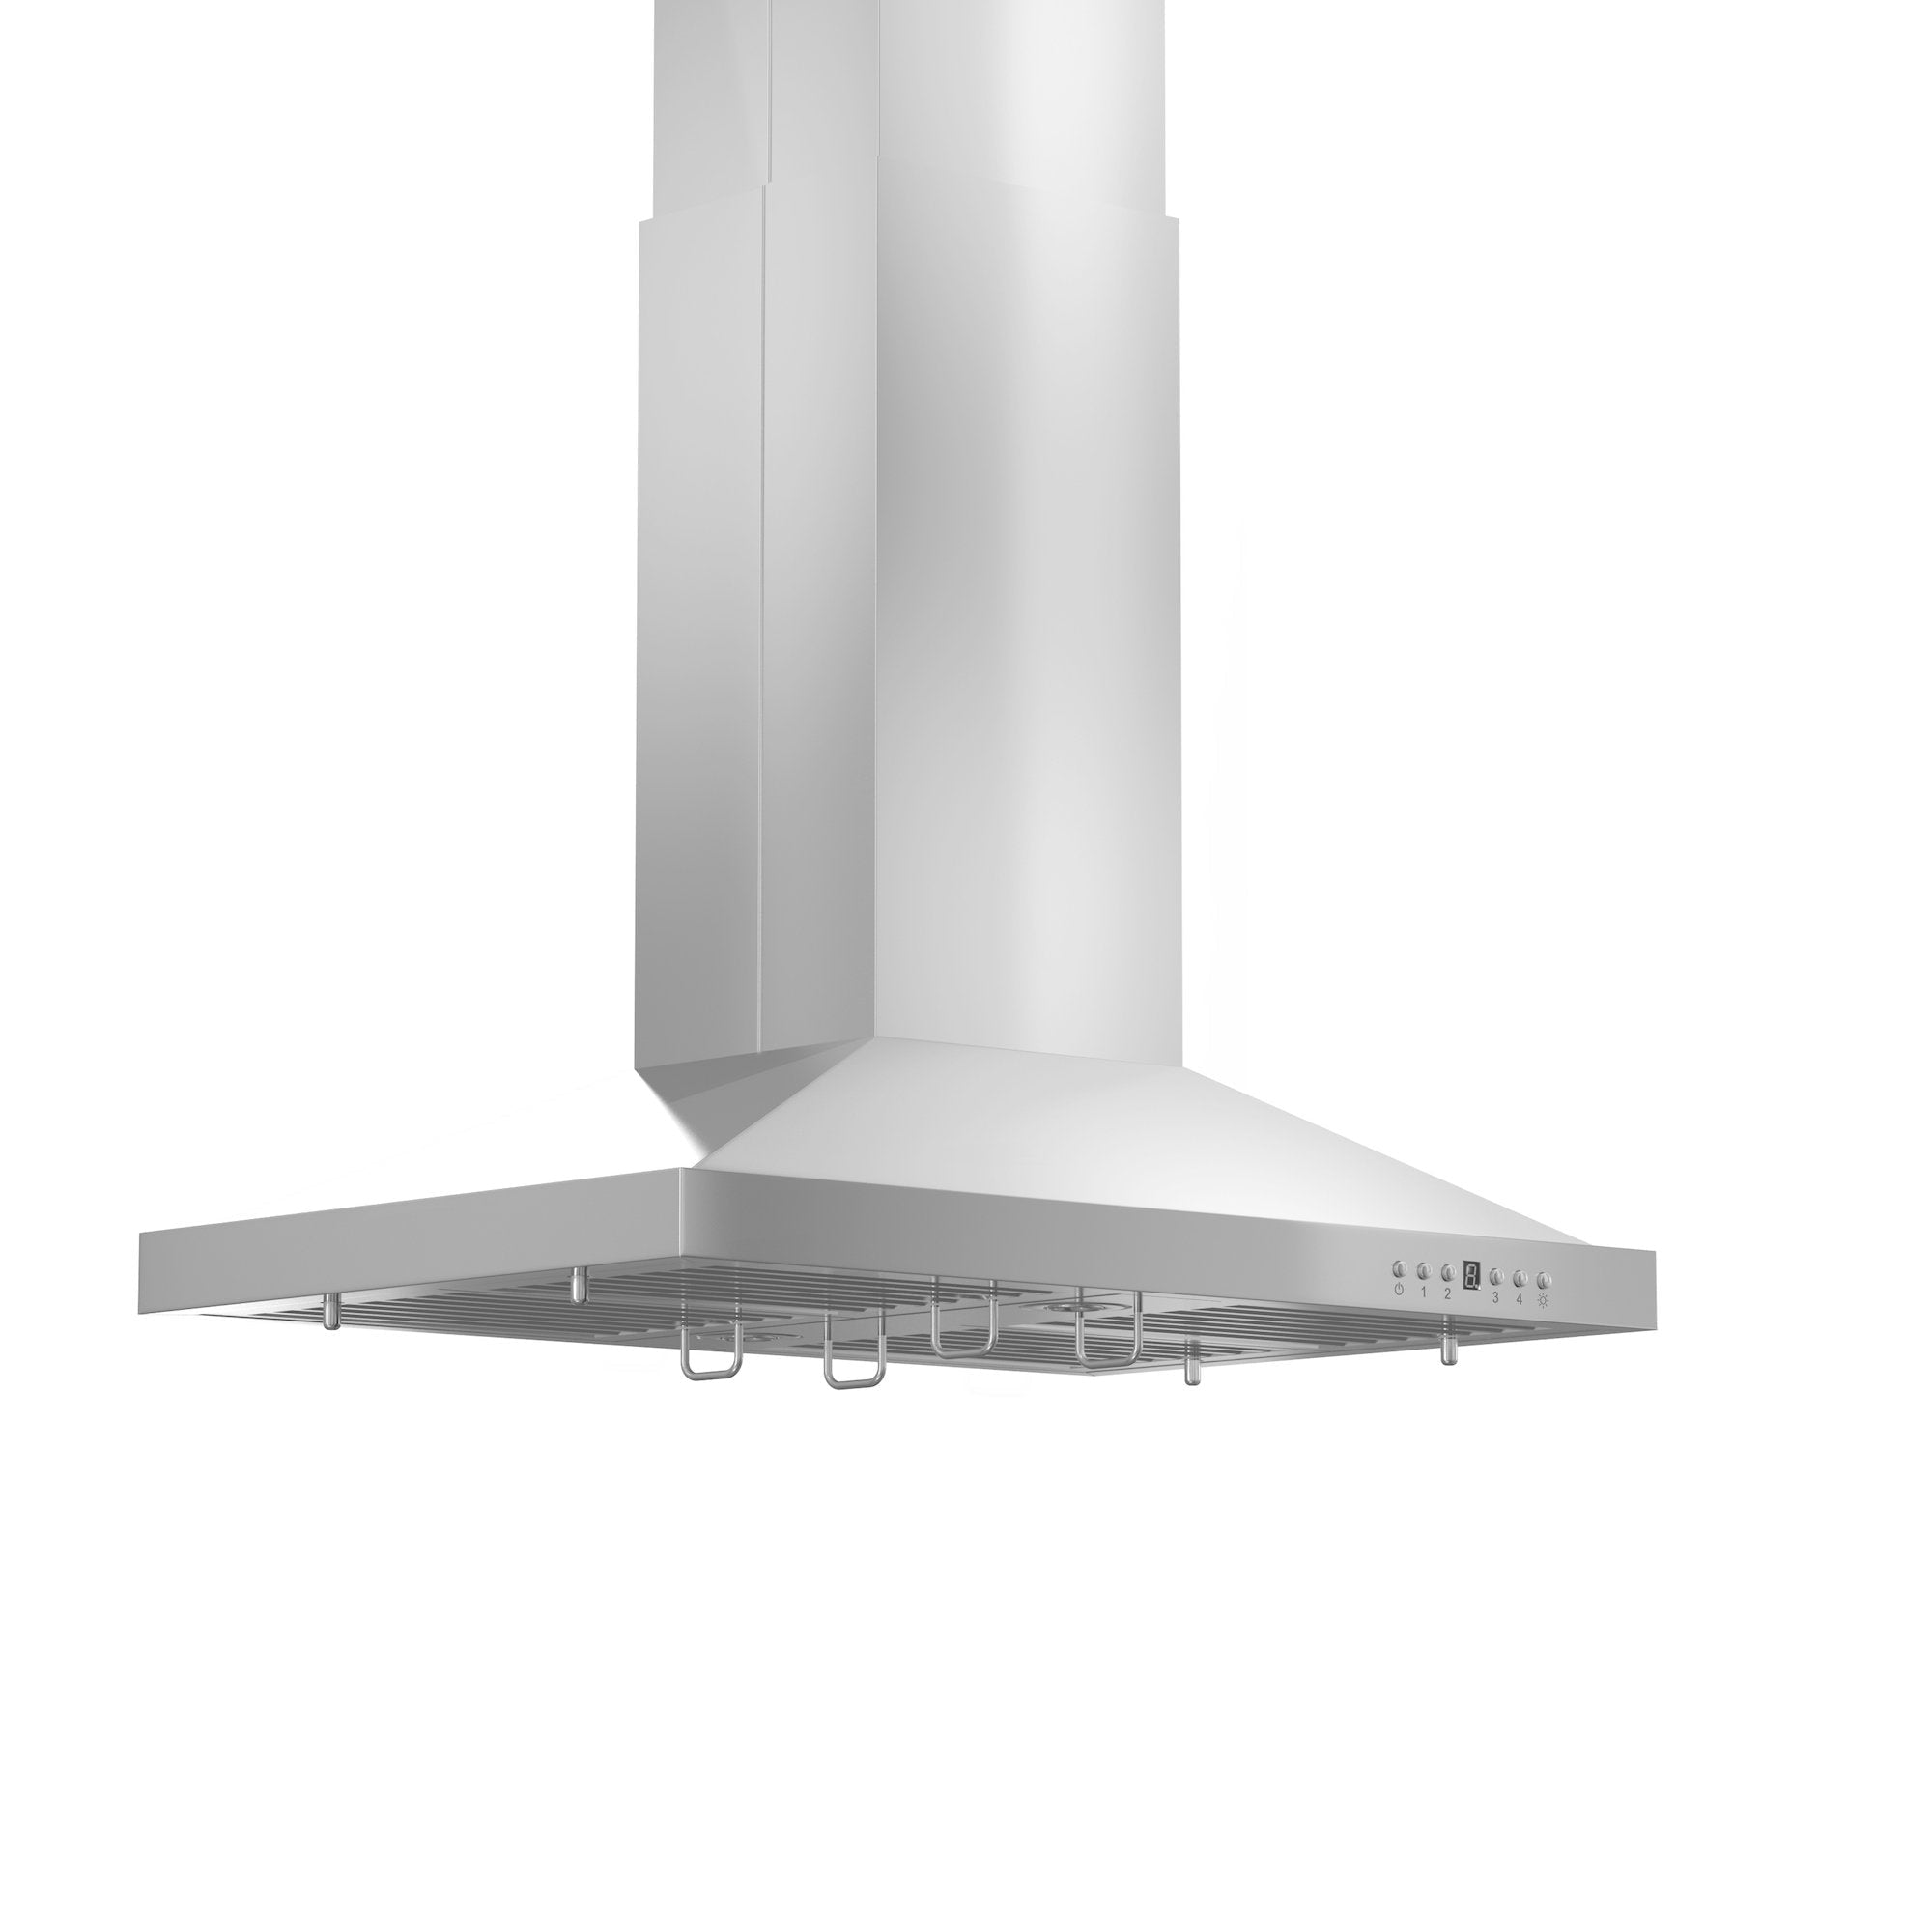 ZLINE Convertible Vent Island Mount Range Hood in Stainless Steel (GL2i) side view with long chimney.